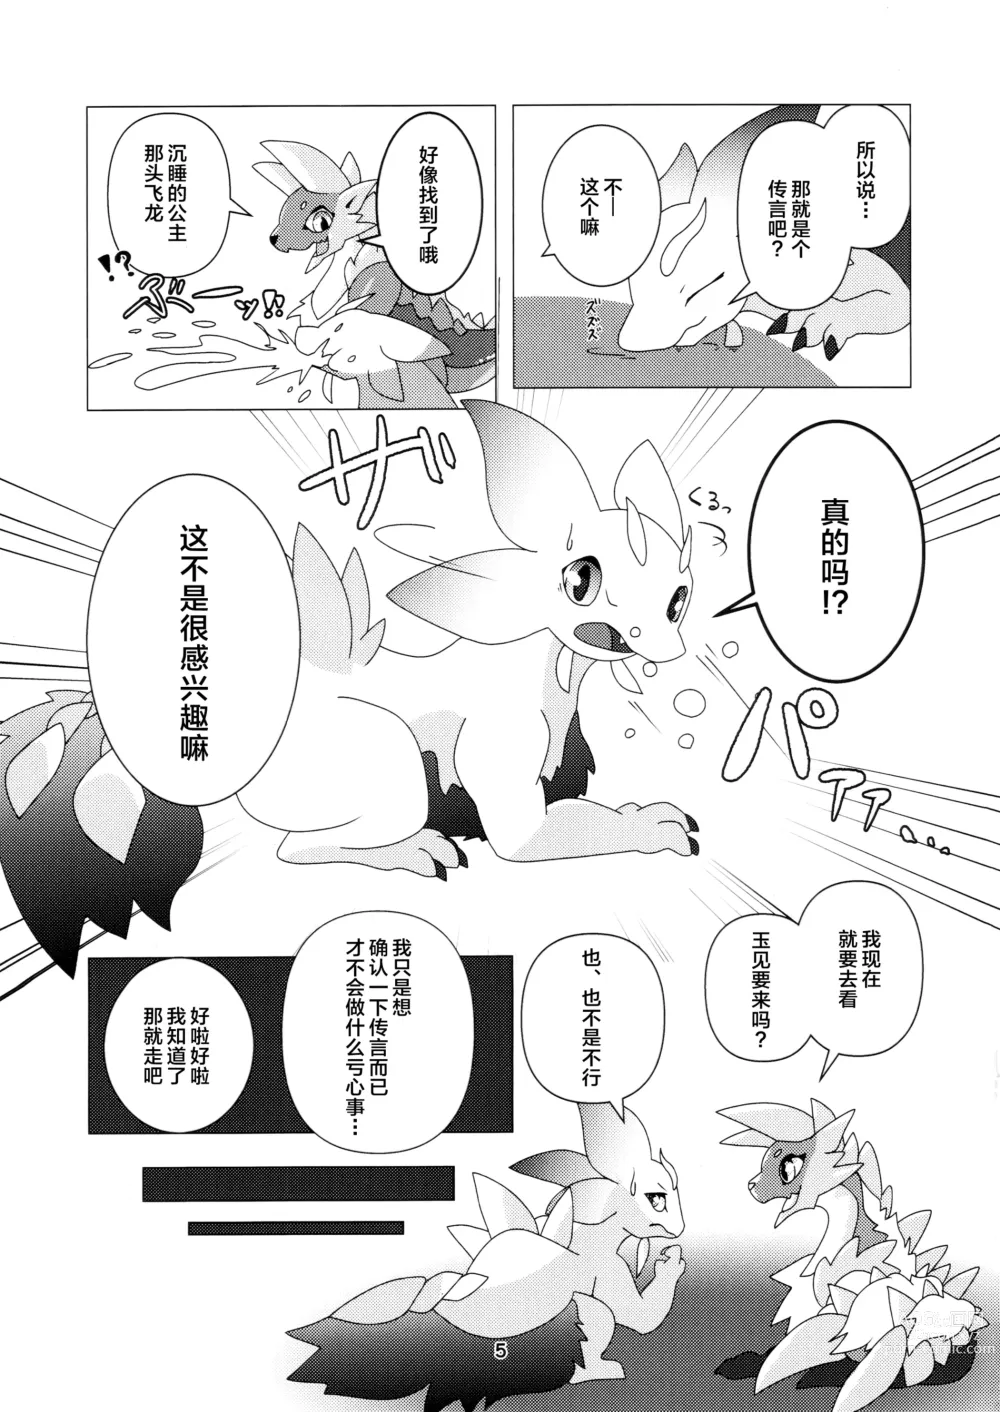 Page 4 of doujinshi 溪流的睡美人